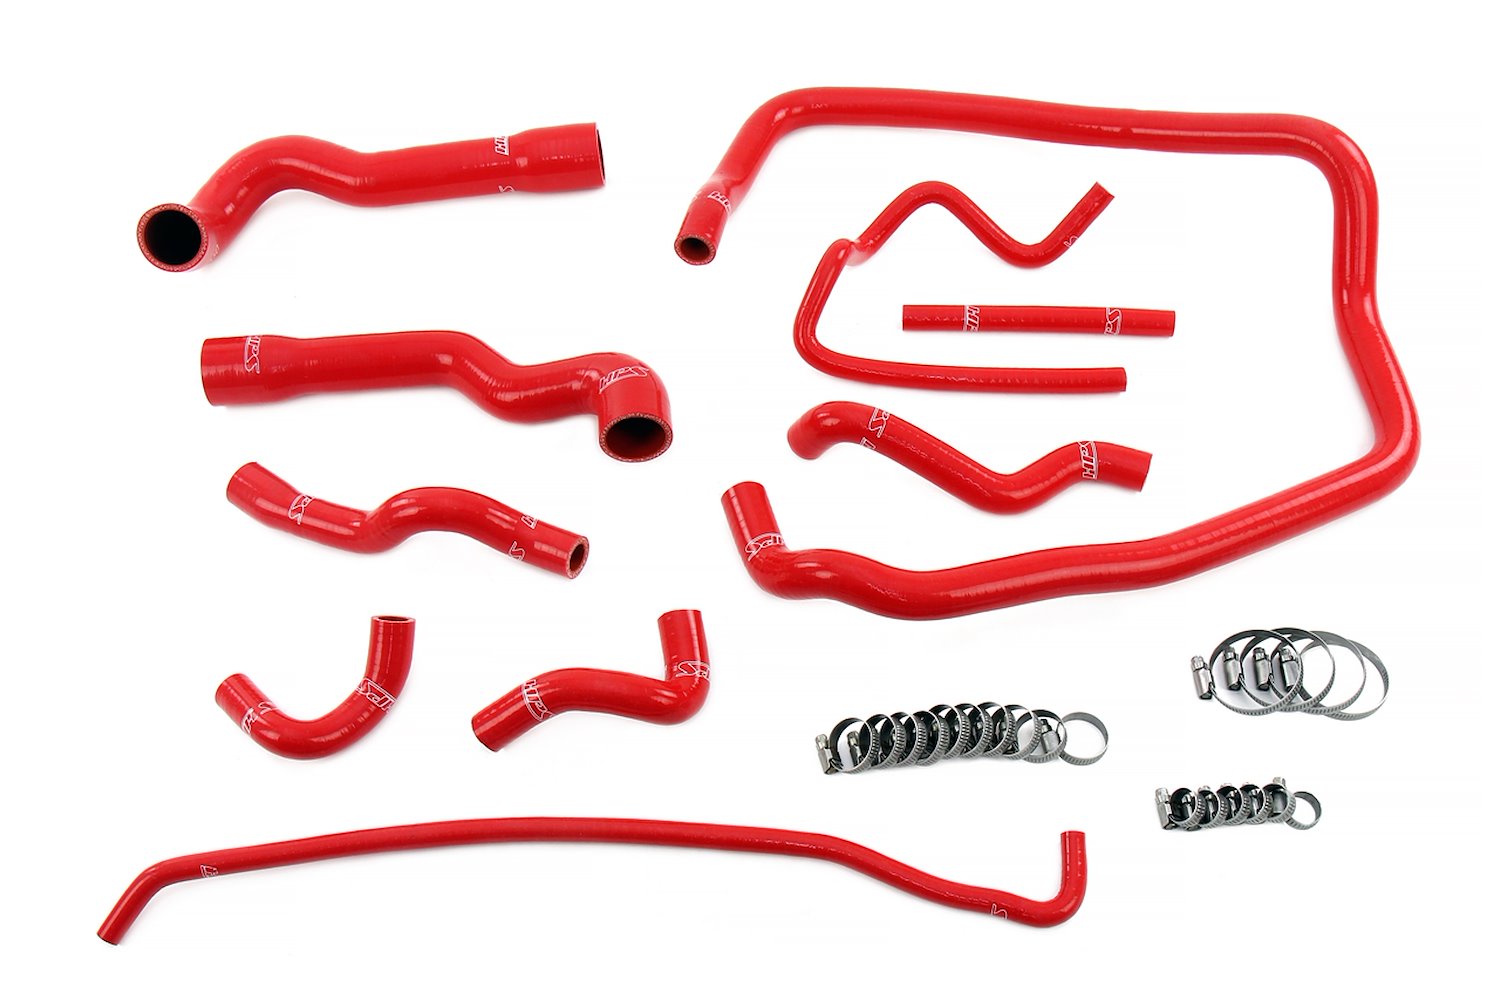 57-2088-RED Coolant Hose Kit, 3-Ply Reinforced Silicone Radiator, Heater, Throttle Body, Expansion Tank Hoses